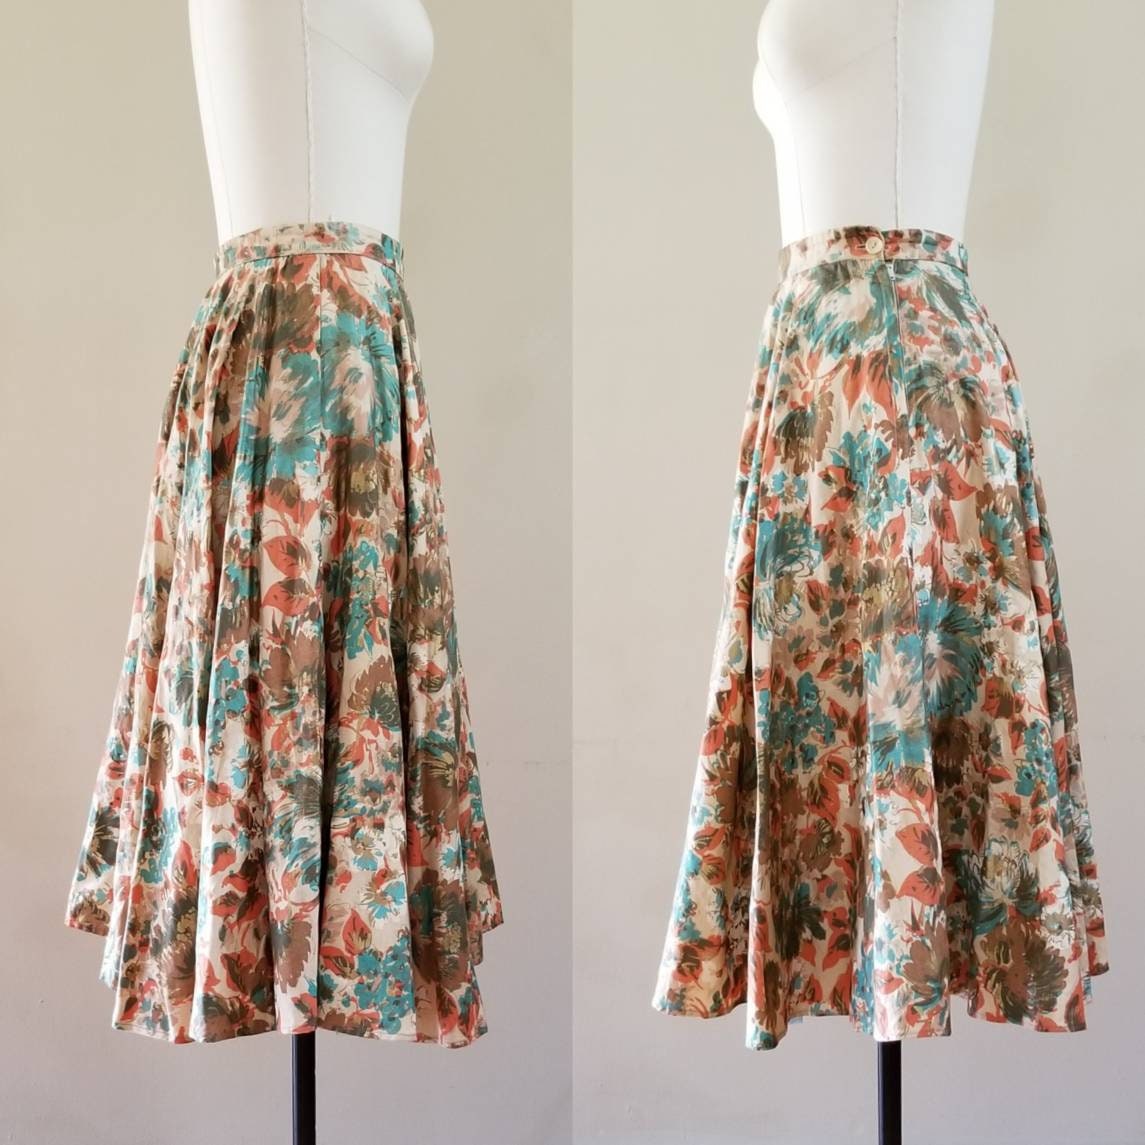 1950s Circle Skirt with Attached Crinoline 50's Cotton Skirt 50s Women ...